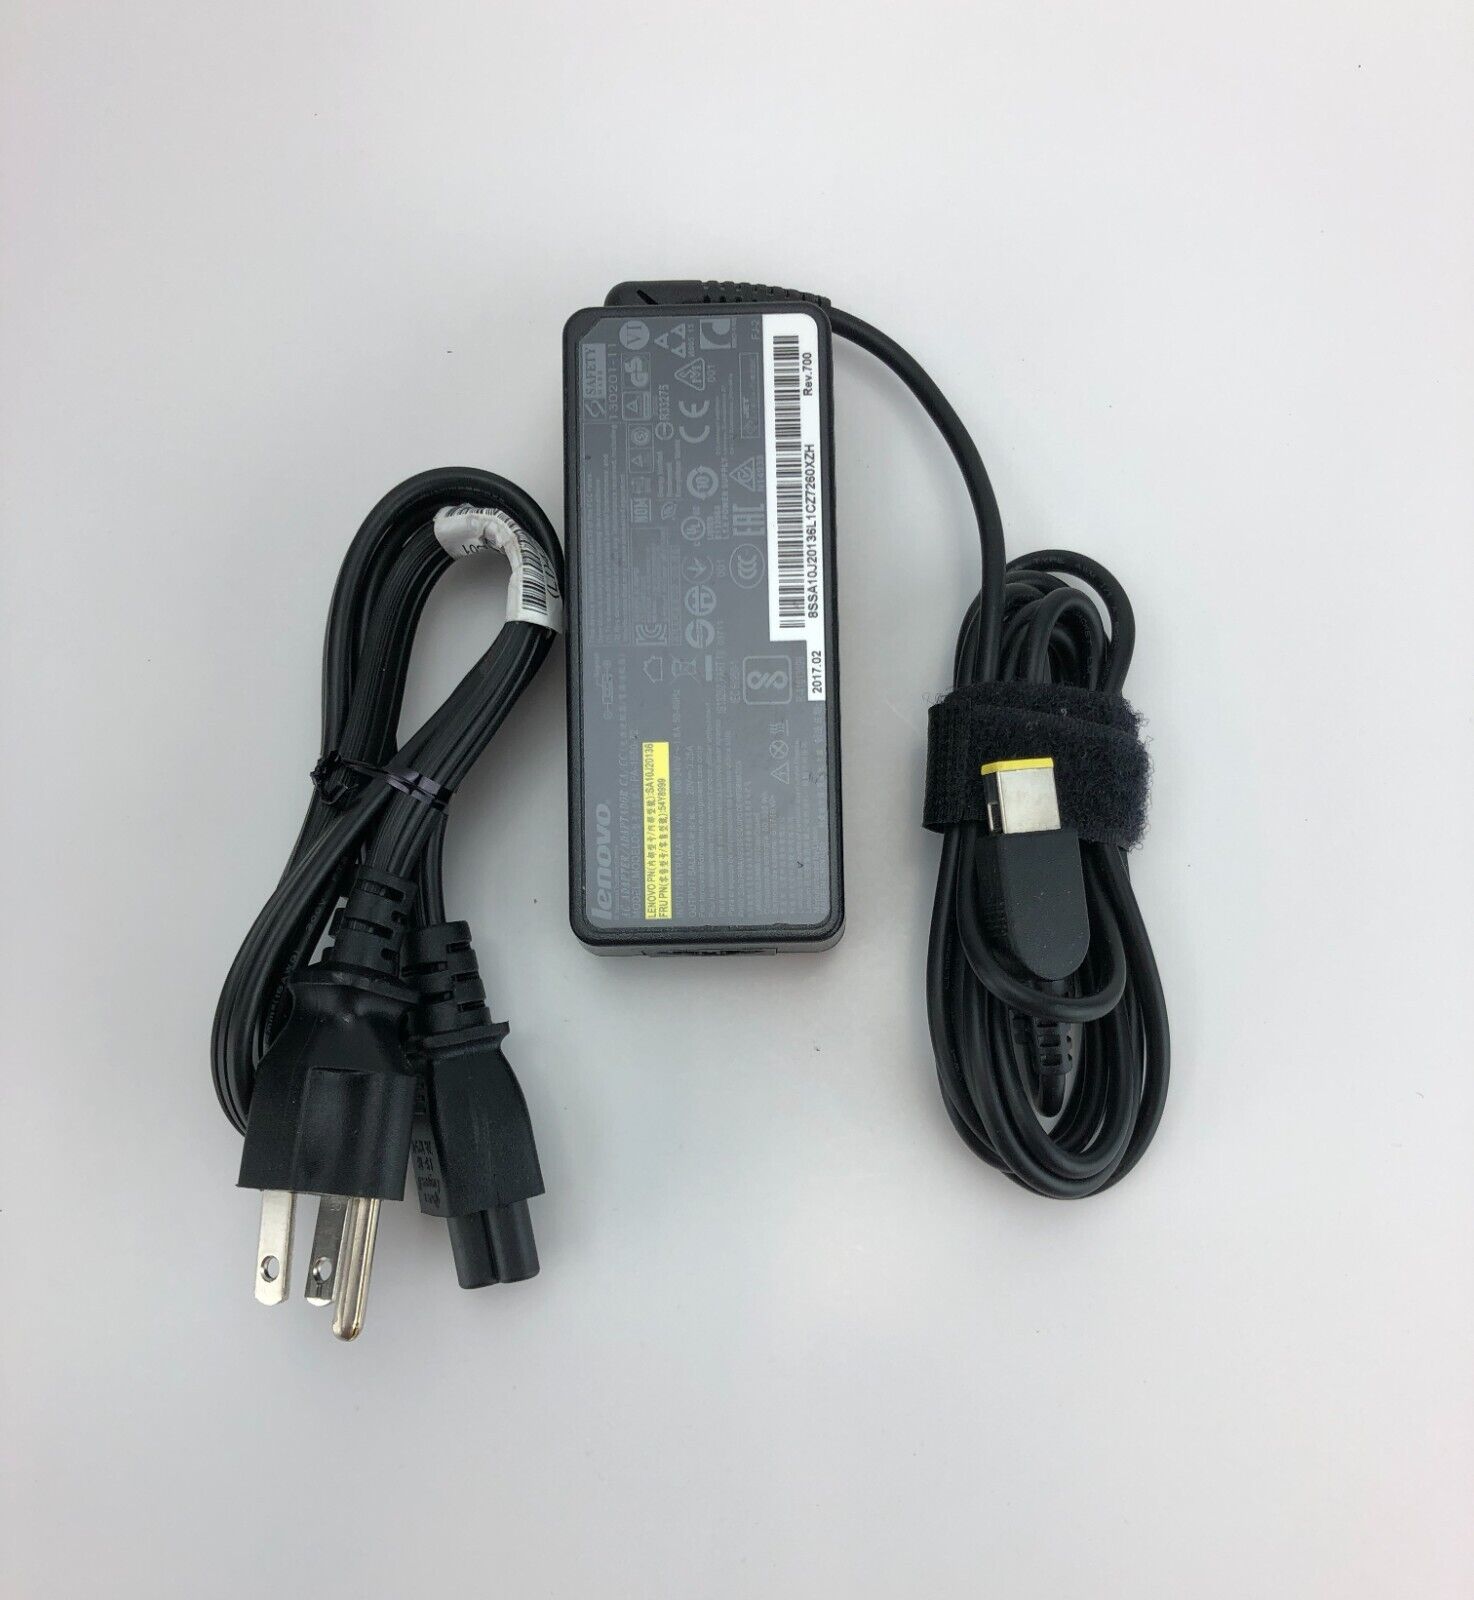 Original Lenovo AC Power Adapter Charger for Thinkpad T560 Laptop w/Cord